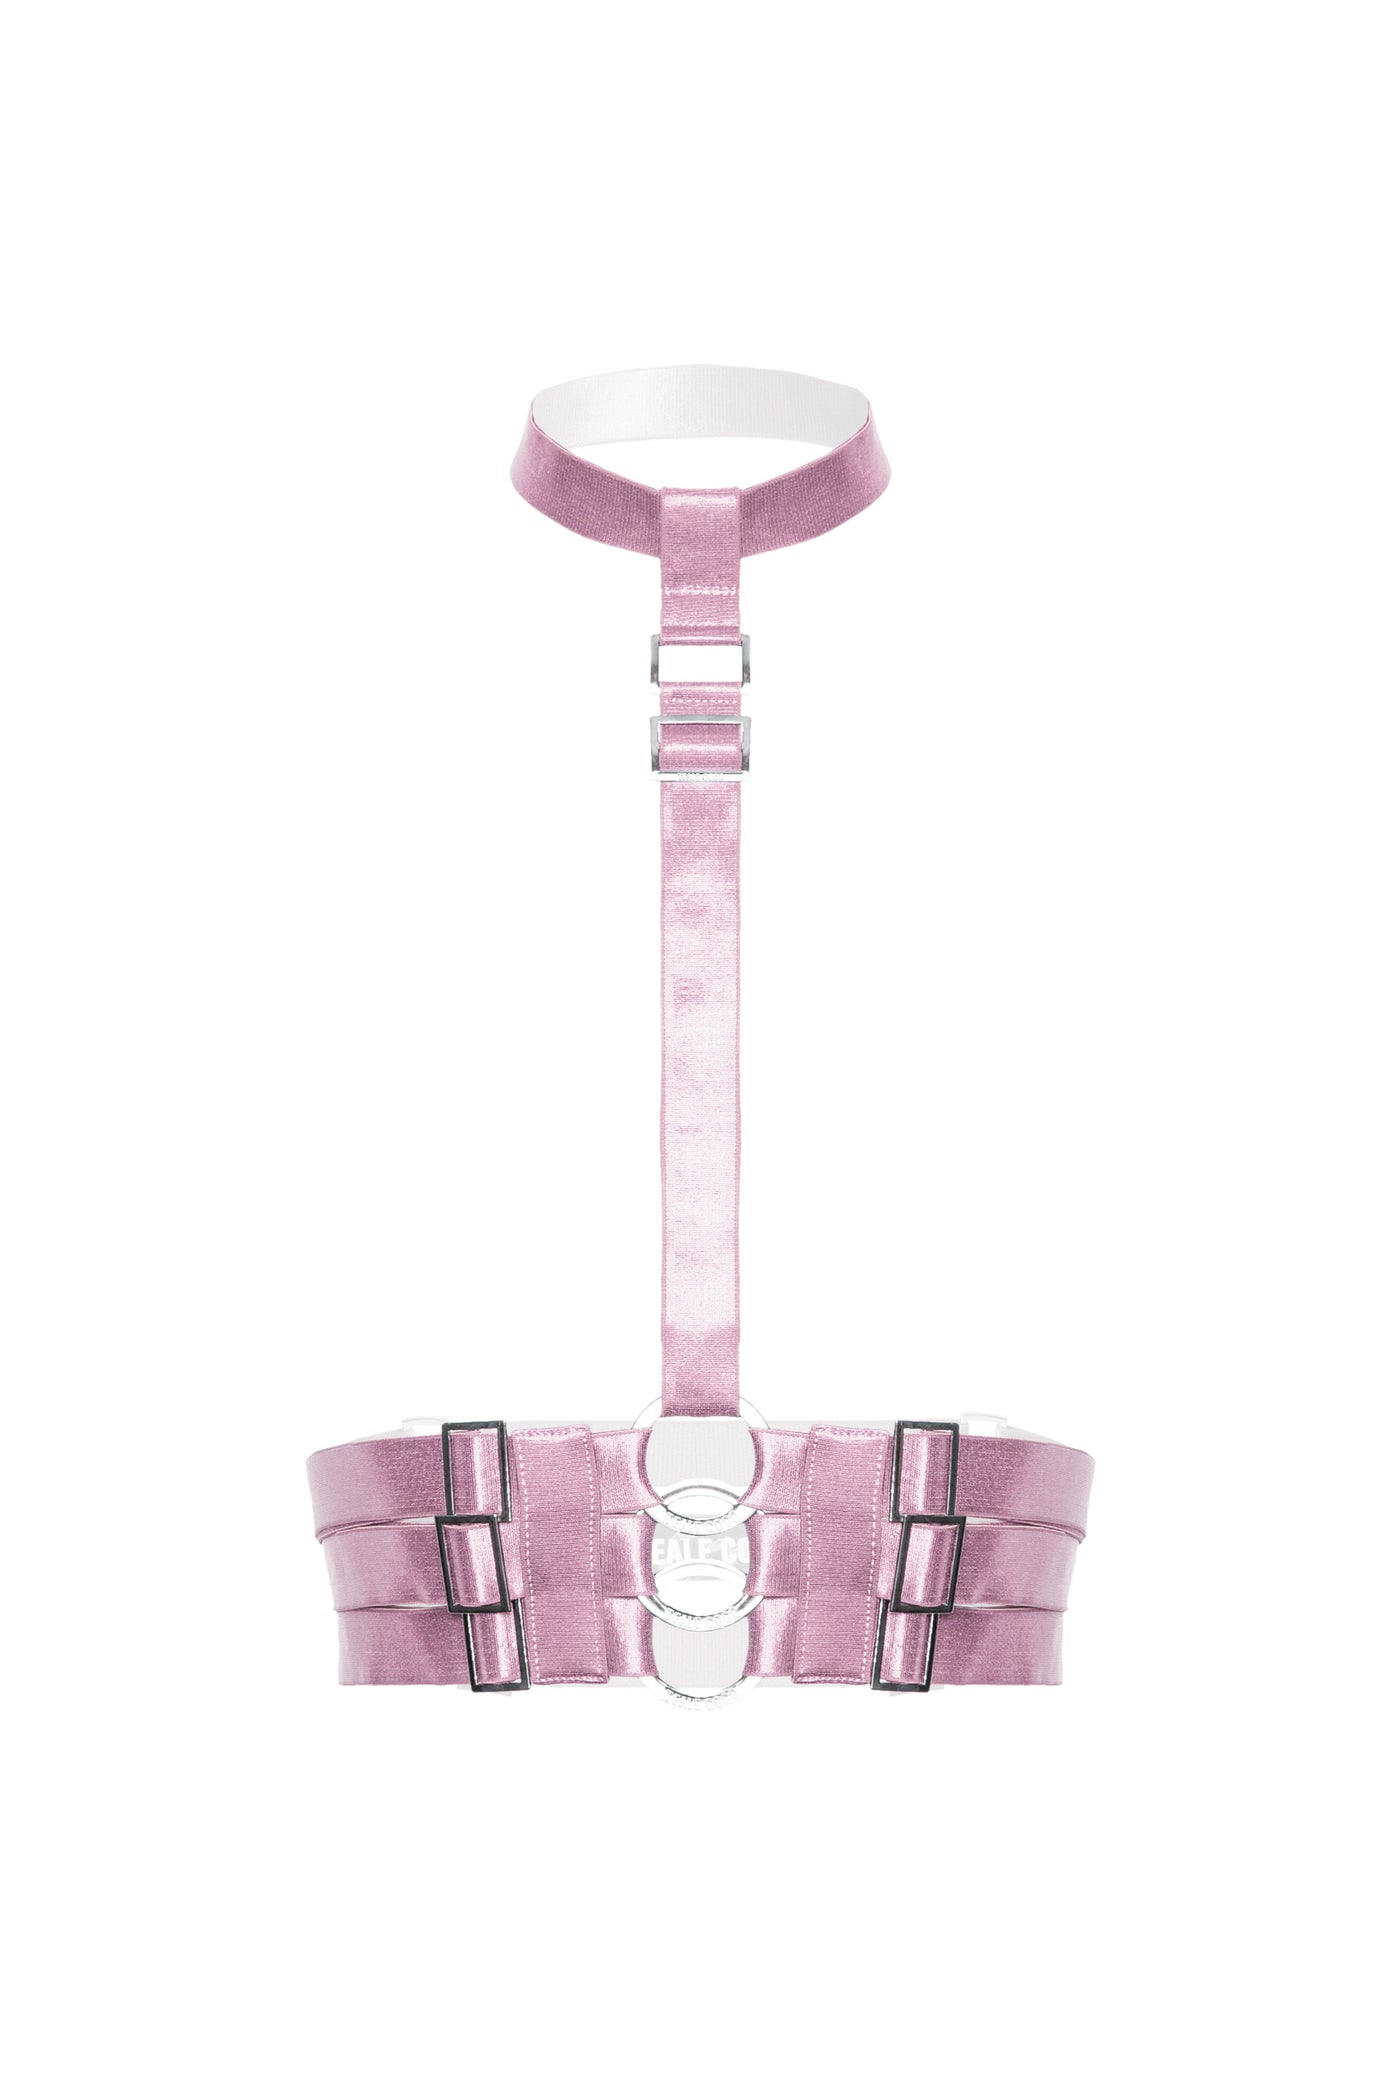 Siren Harness (Dusted Pink)